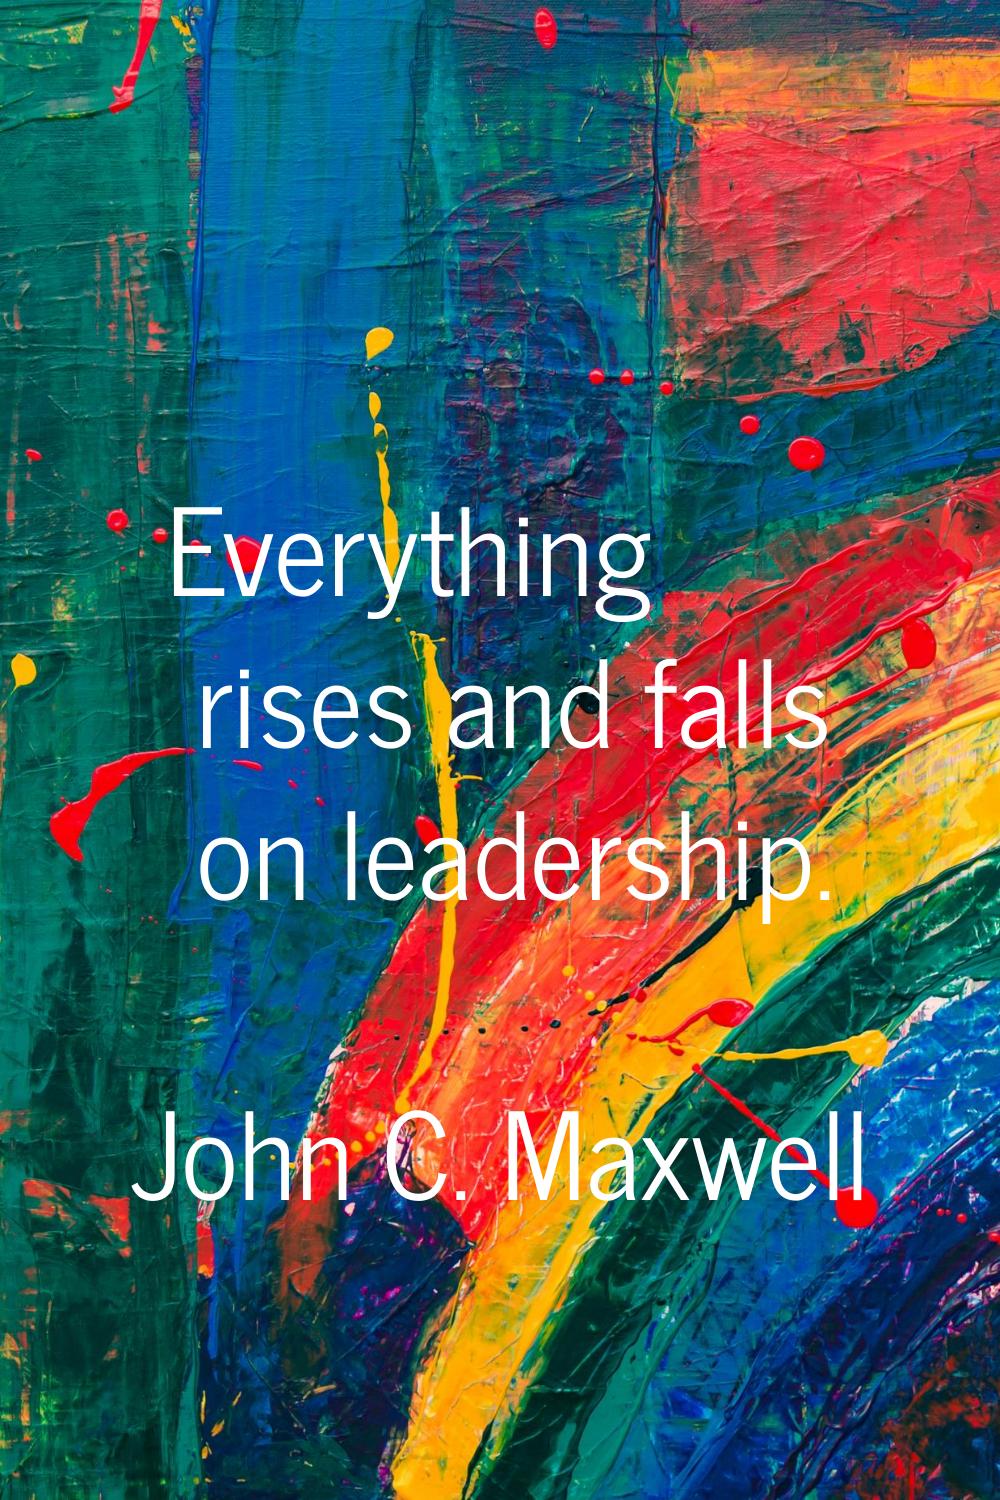 Everything rises and falls on leadership.